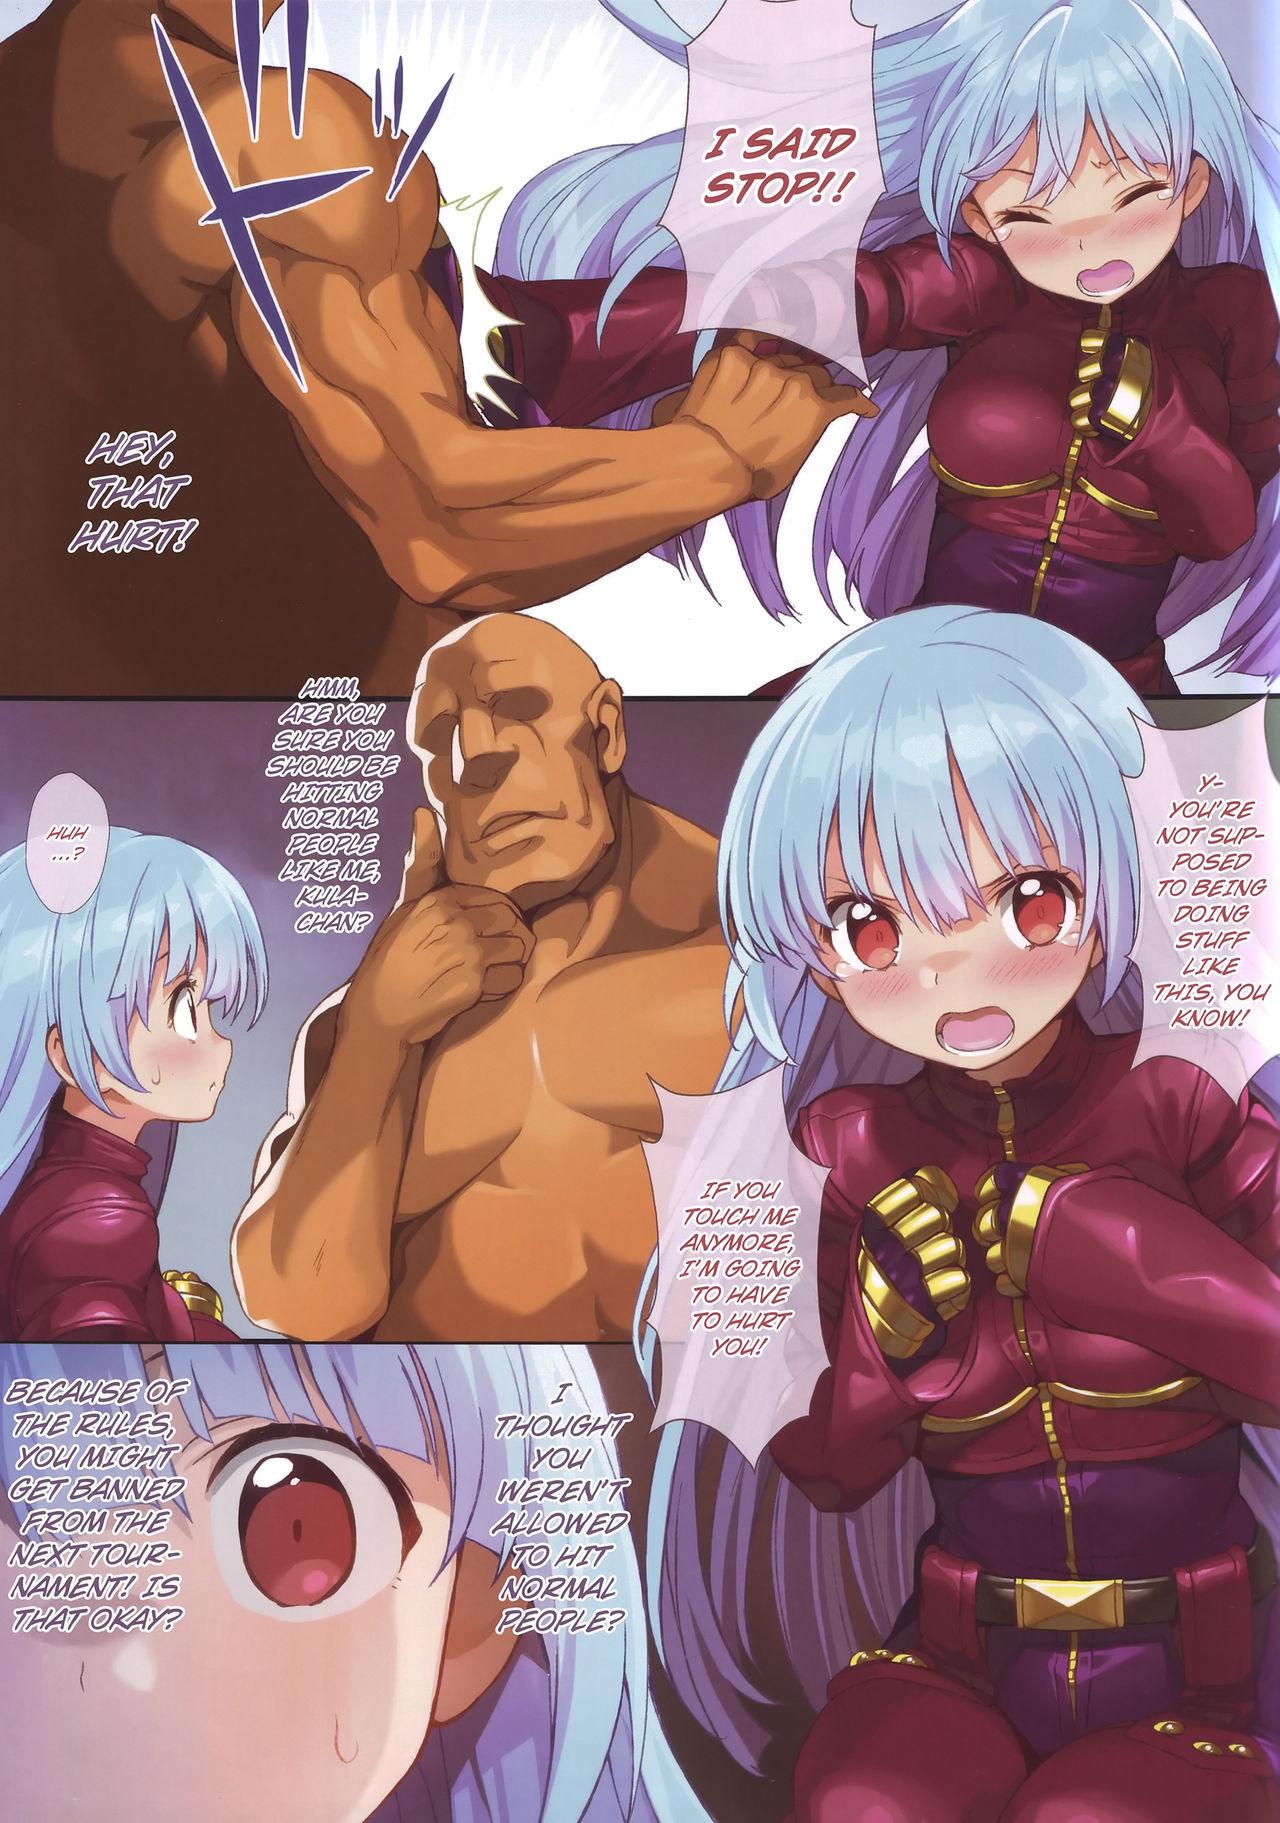 Spa FREE CANDY + FREE PAPER - King of fighters Flogging - Page 4